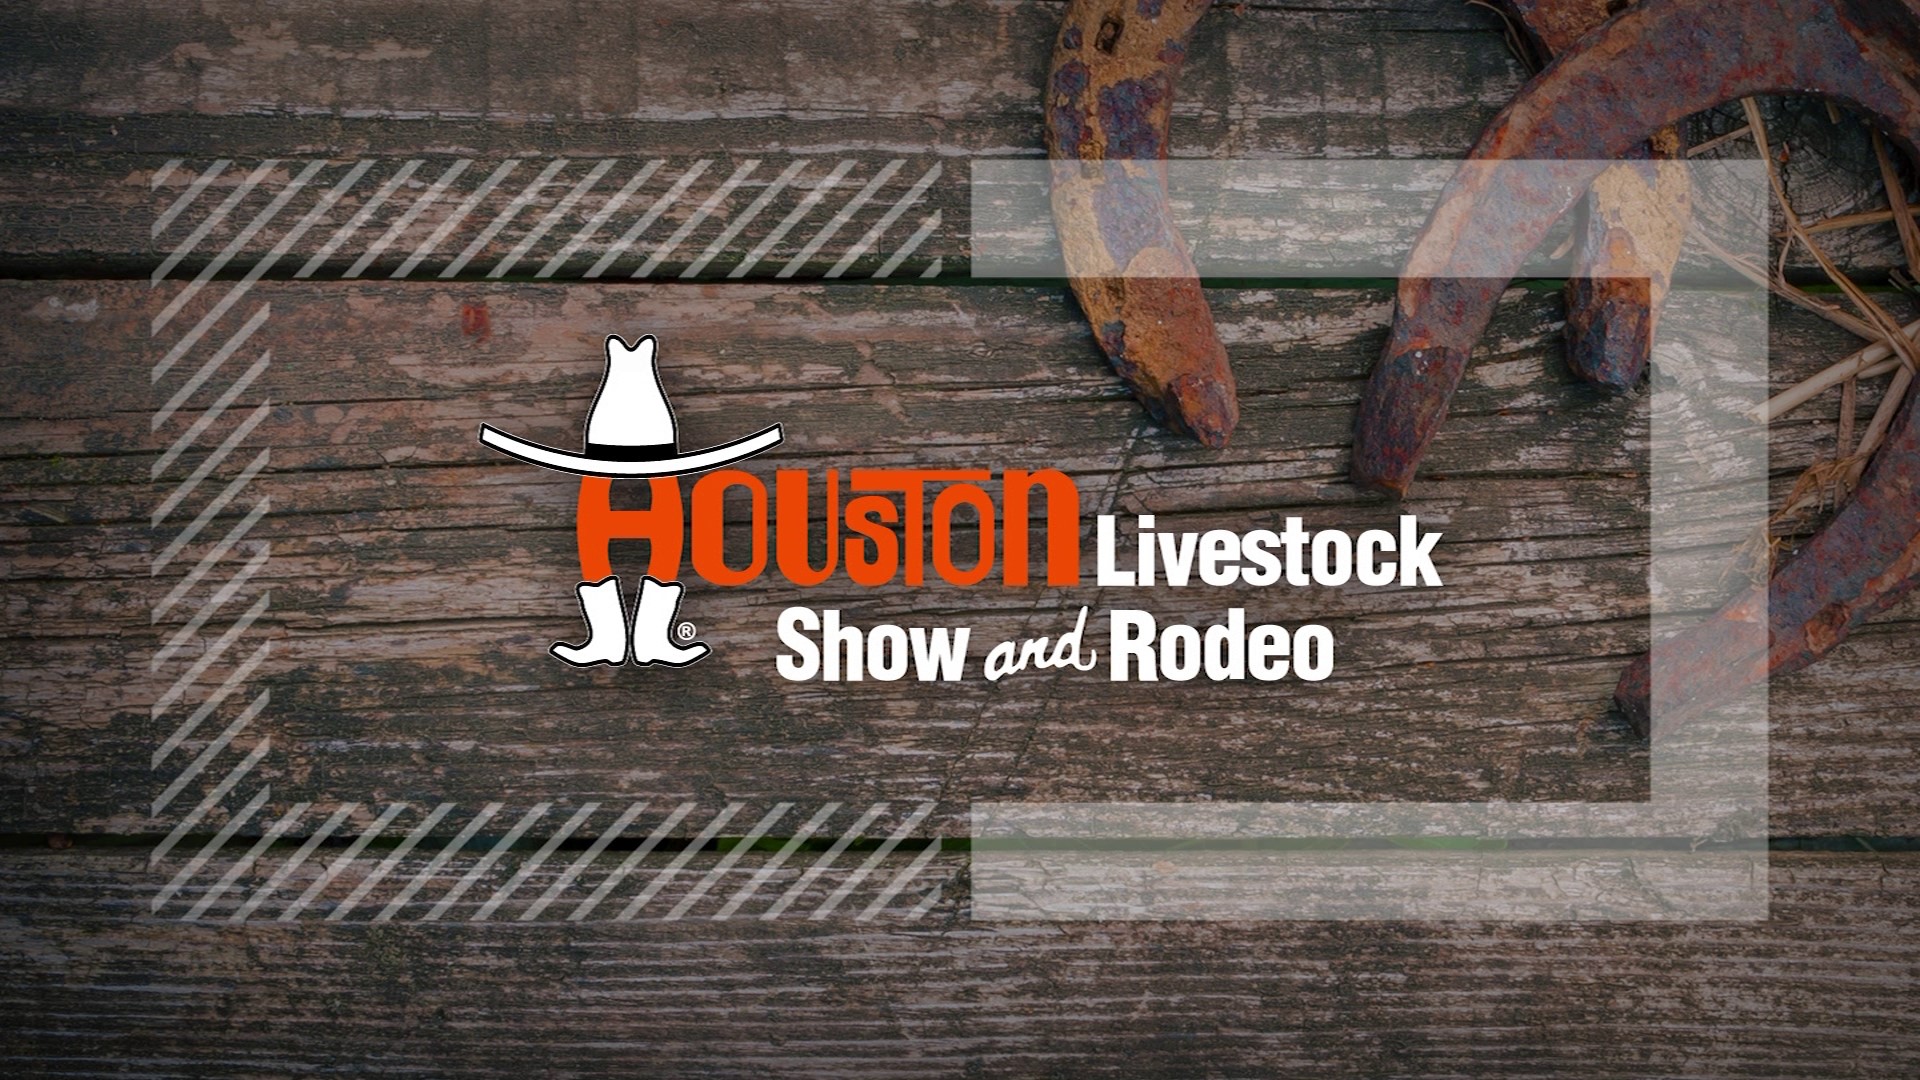 Ahead of the 2023 RodeoHouston season getting started, we're looking back at the highlights from 2022!